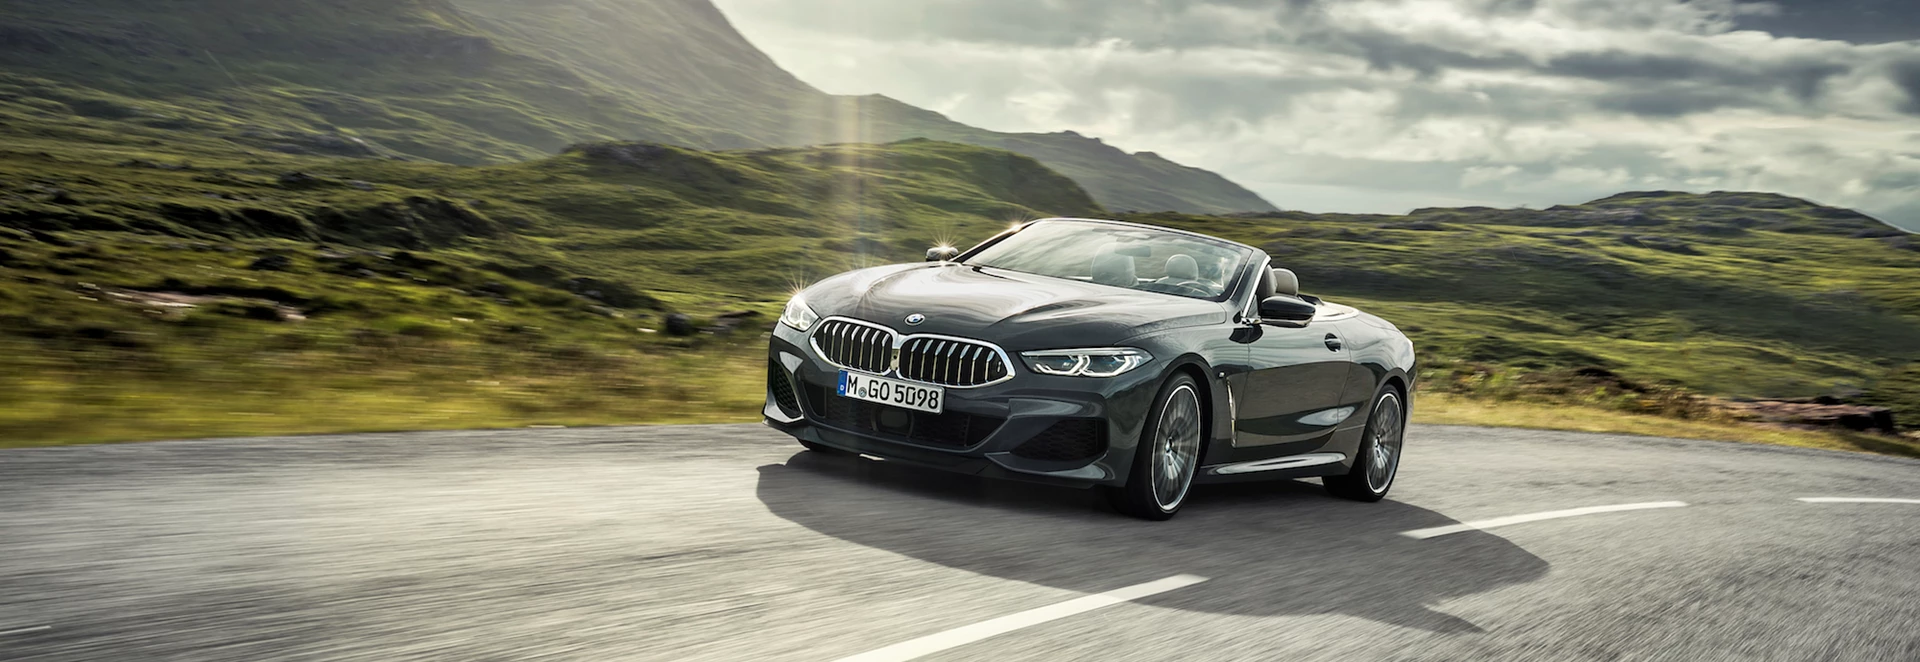 2019 BMW 8 Series Convertible – the stand-out features